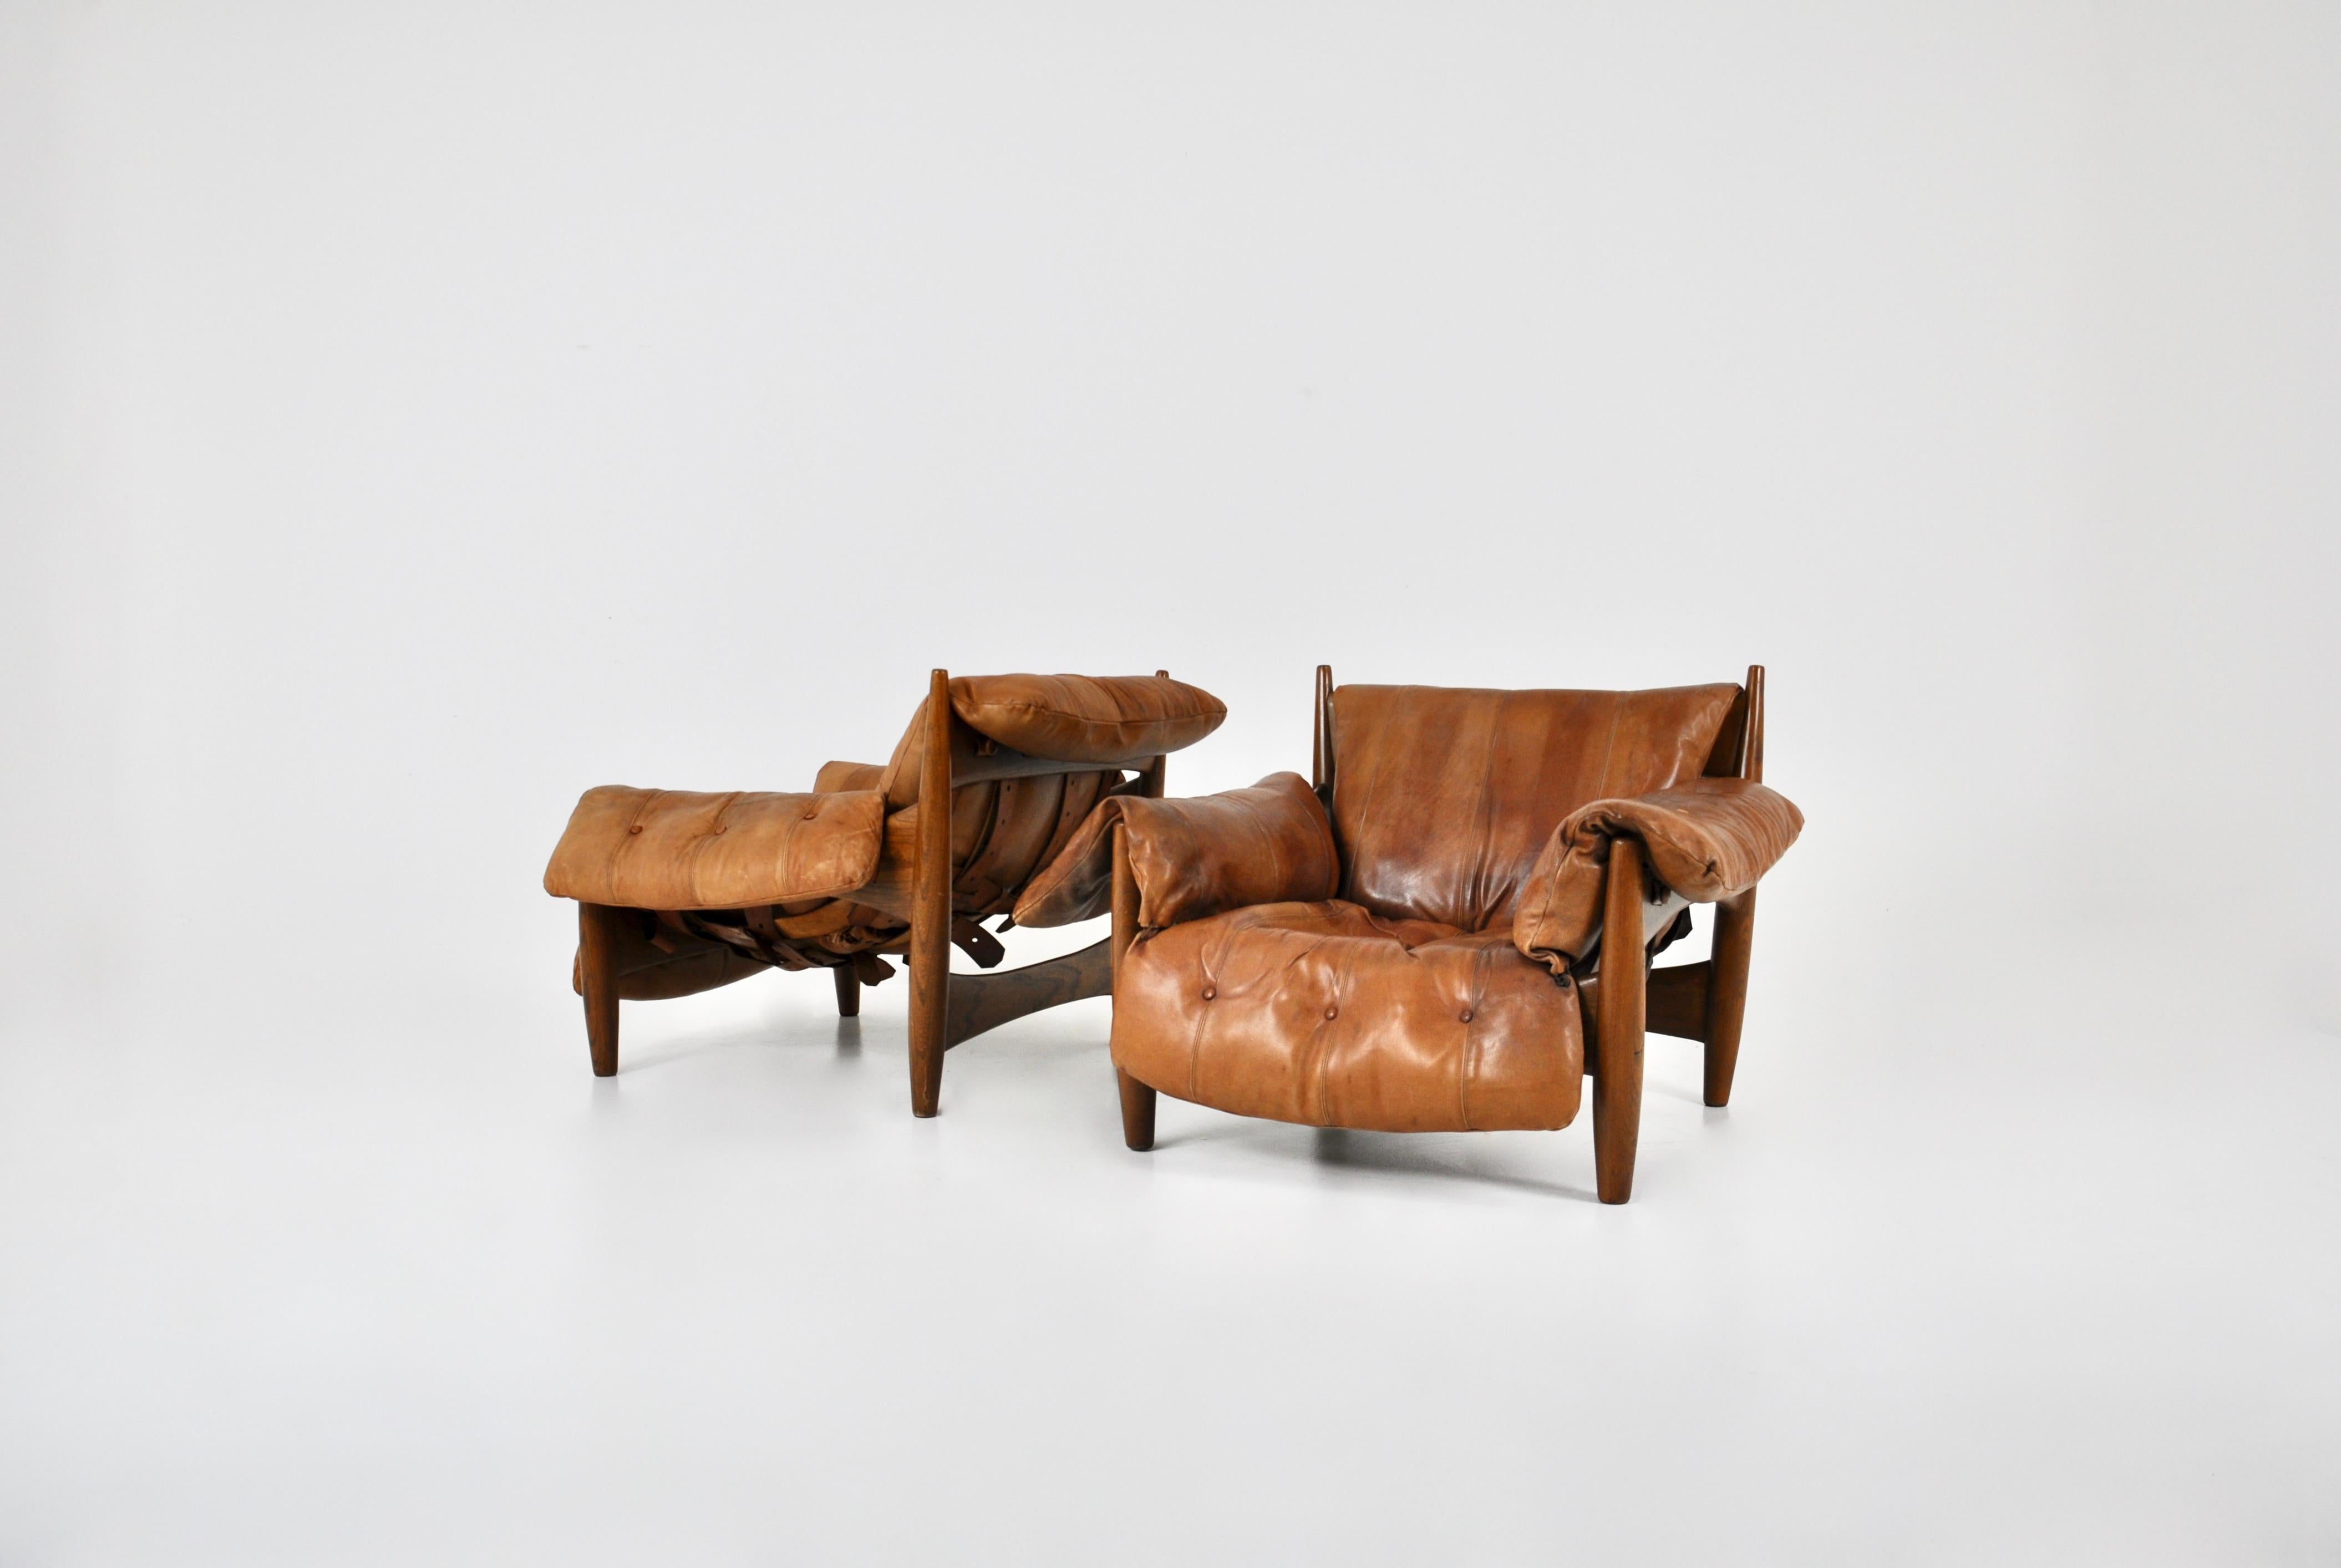 Pair of brown leather and wood armchairs by Sergio Rodrigues. Model: Sheriff. Stamped ISA. Seat height: 35 cm.
Wear due to time and the age of the armchairs.